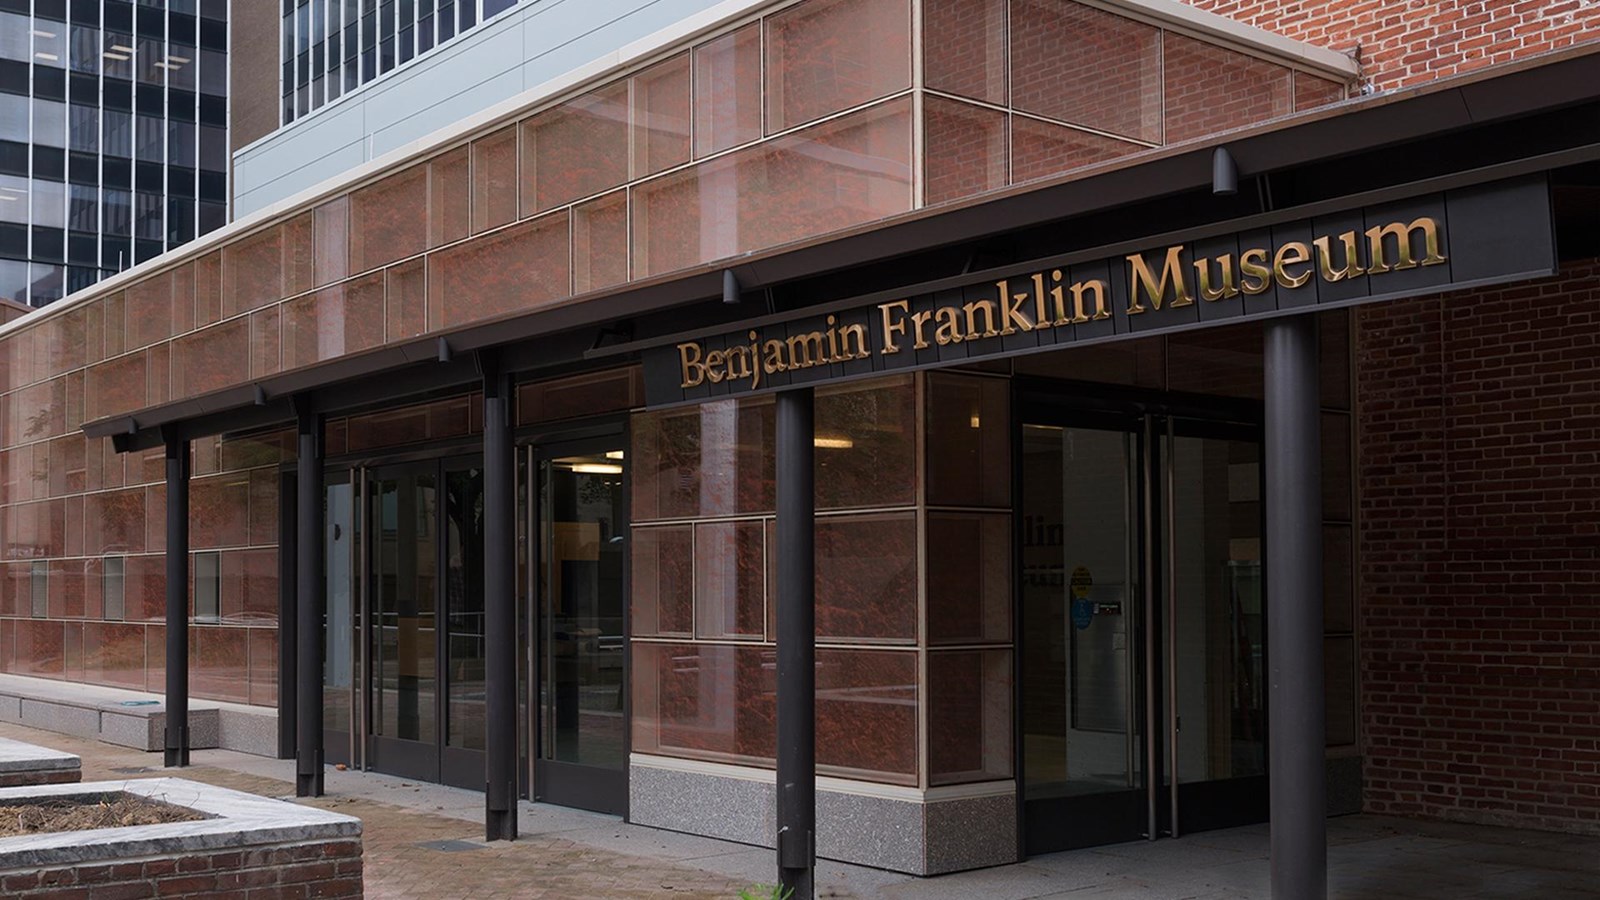 The exterior of a single story modern red building with an awning that says Benjamin Franklin Museum